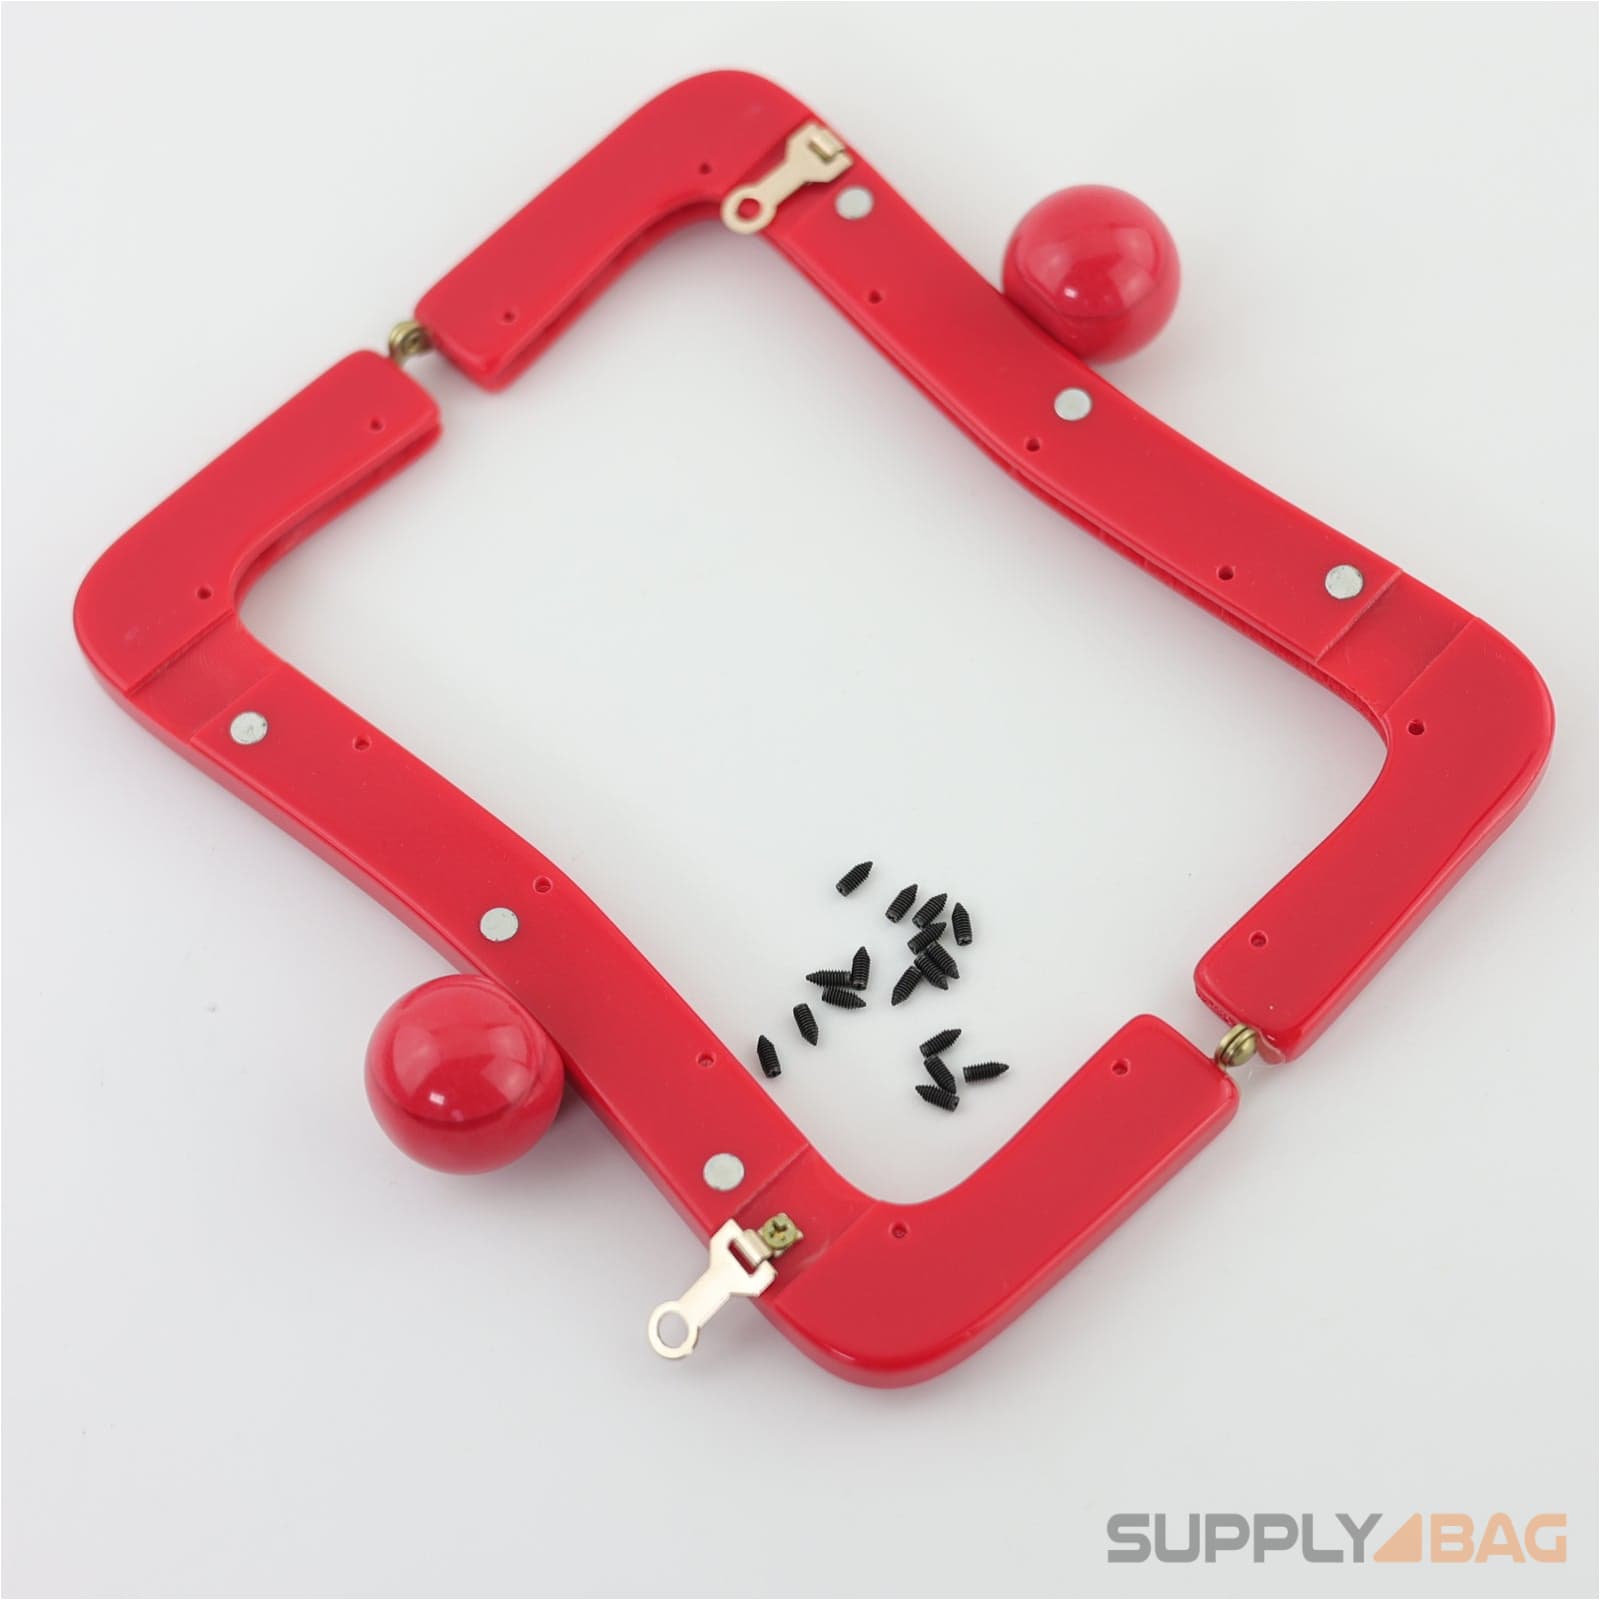 8 x 3 1/4 inch - red acrylic purse frame with chain loops